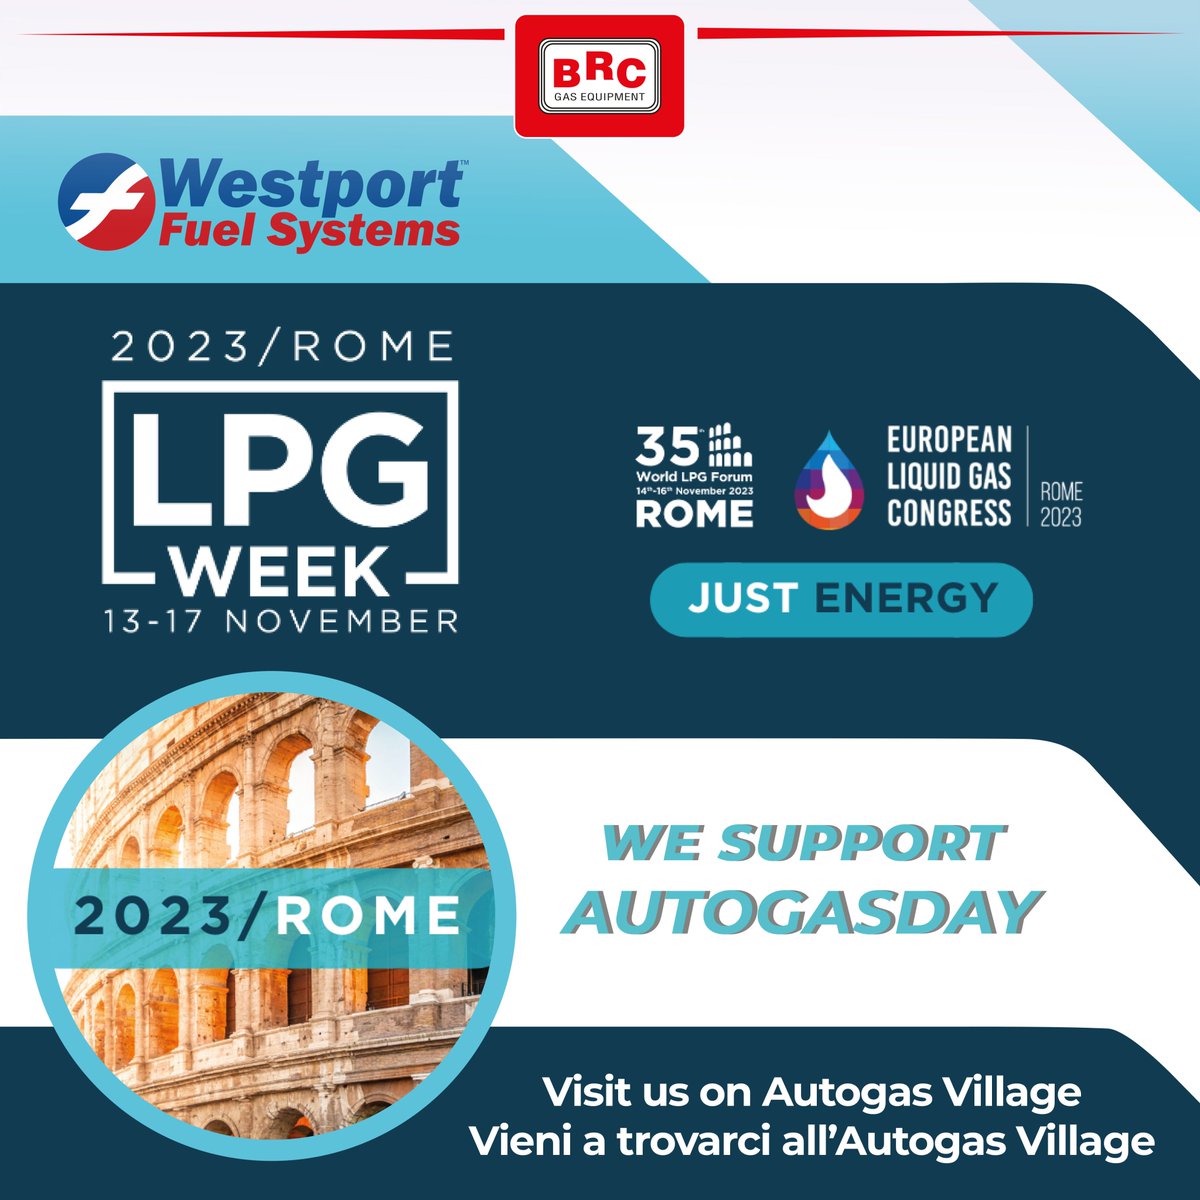 World LPG Forum and the European Liquid Gas Congress come together #WestportFuelSystems will be the main sponsor of the #AutogasVillage lpgweek.com/rome-2023